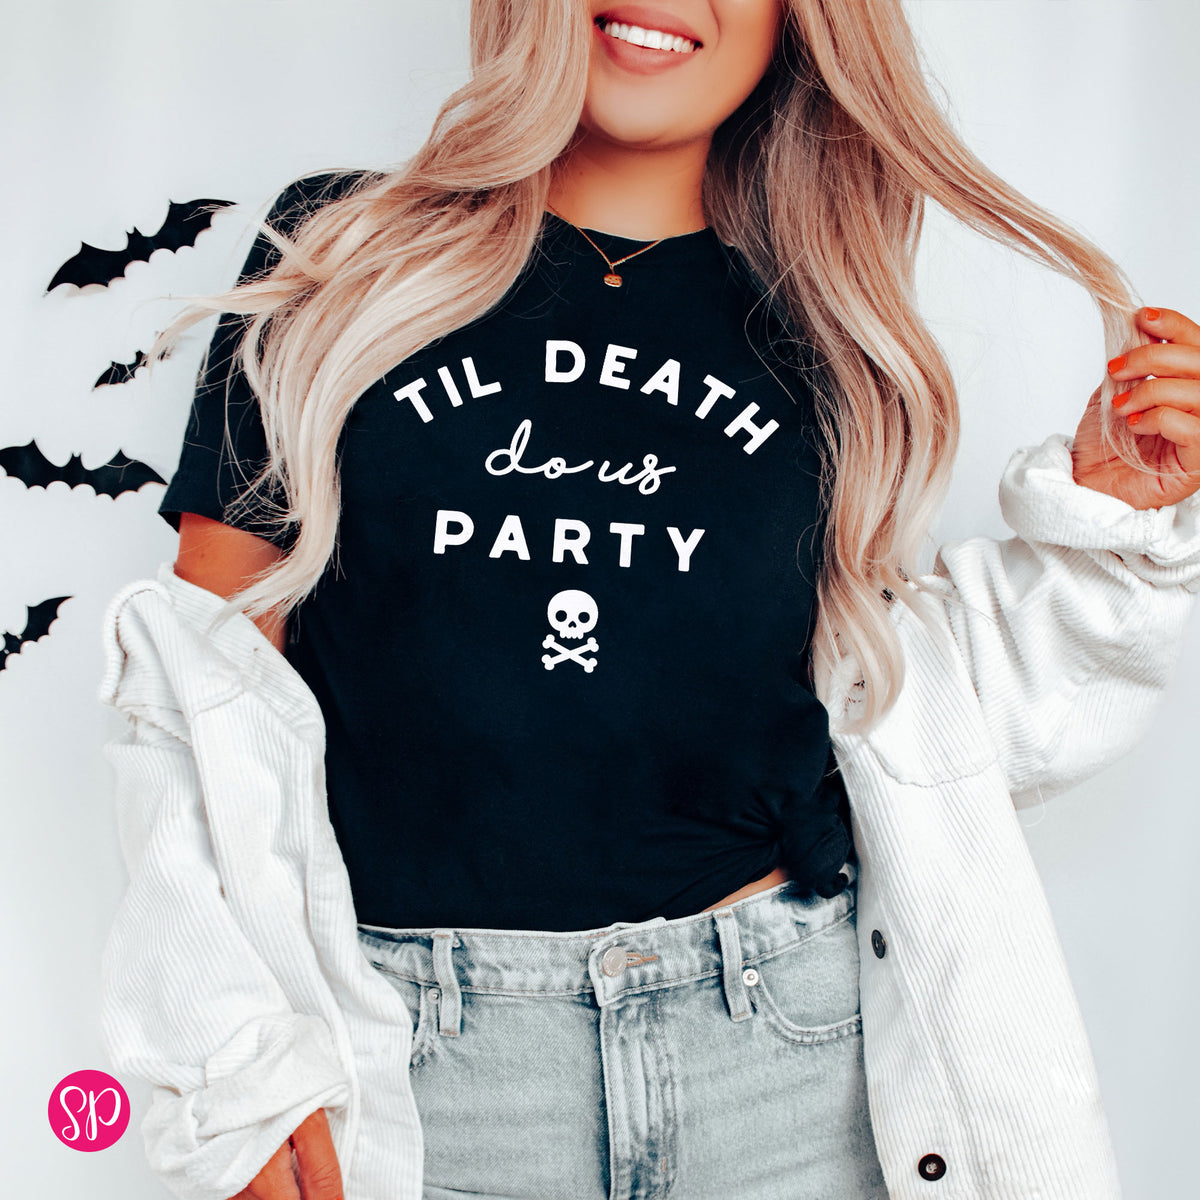 Til Death Do Us Party Unisex T-Shirt Halloween Group Matching Funny Bachelorette Party Tee Shirt